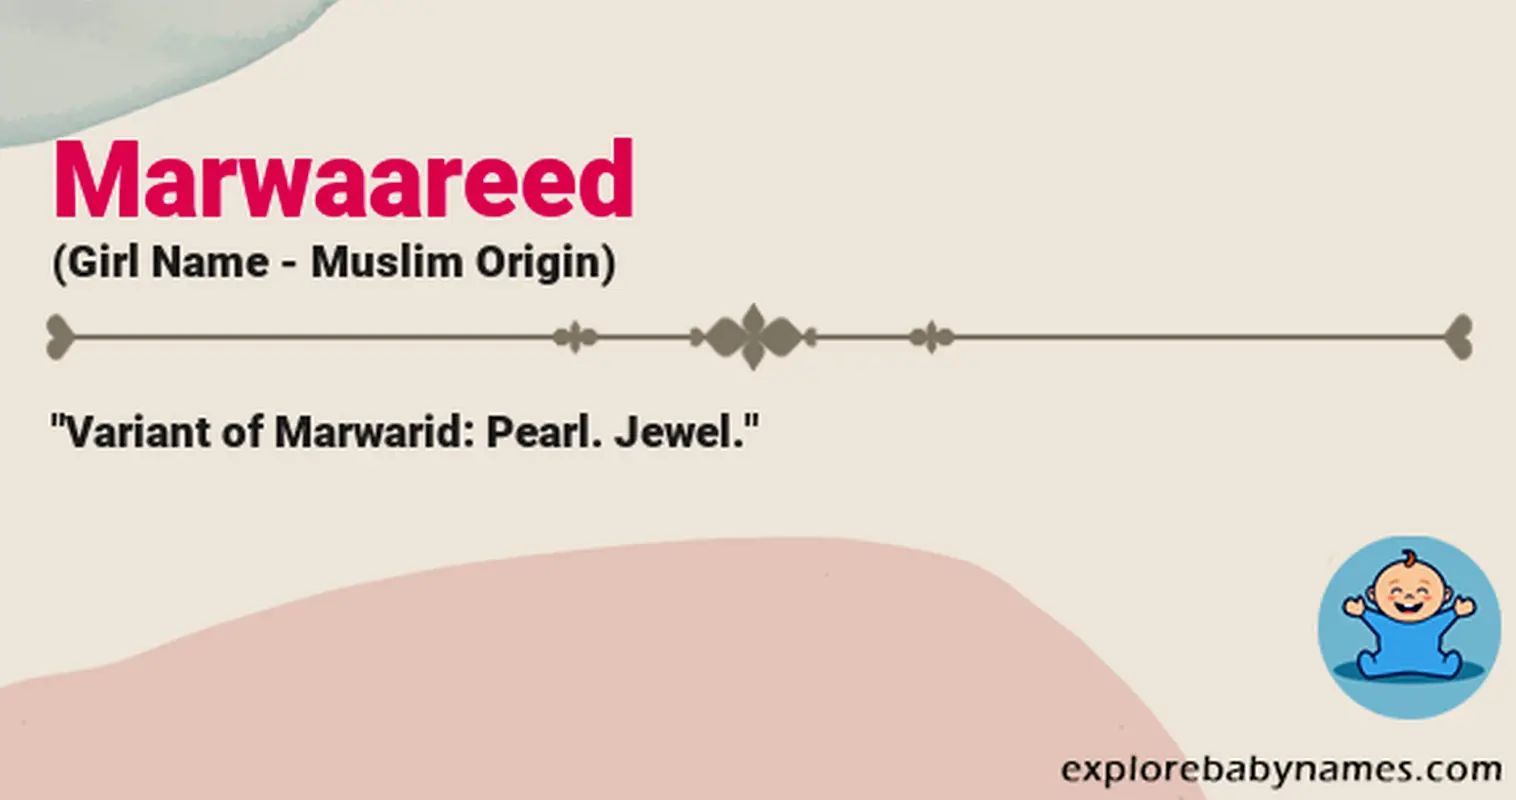 Meaning of Marwaareed